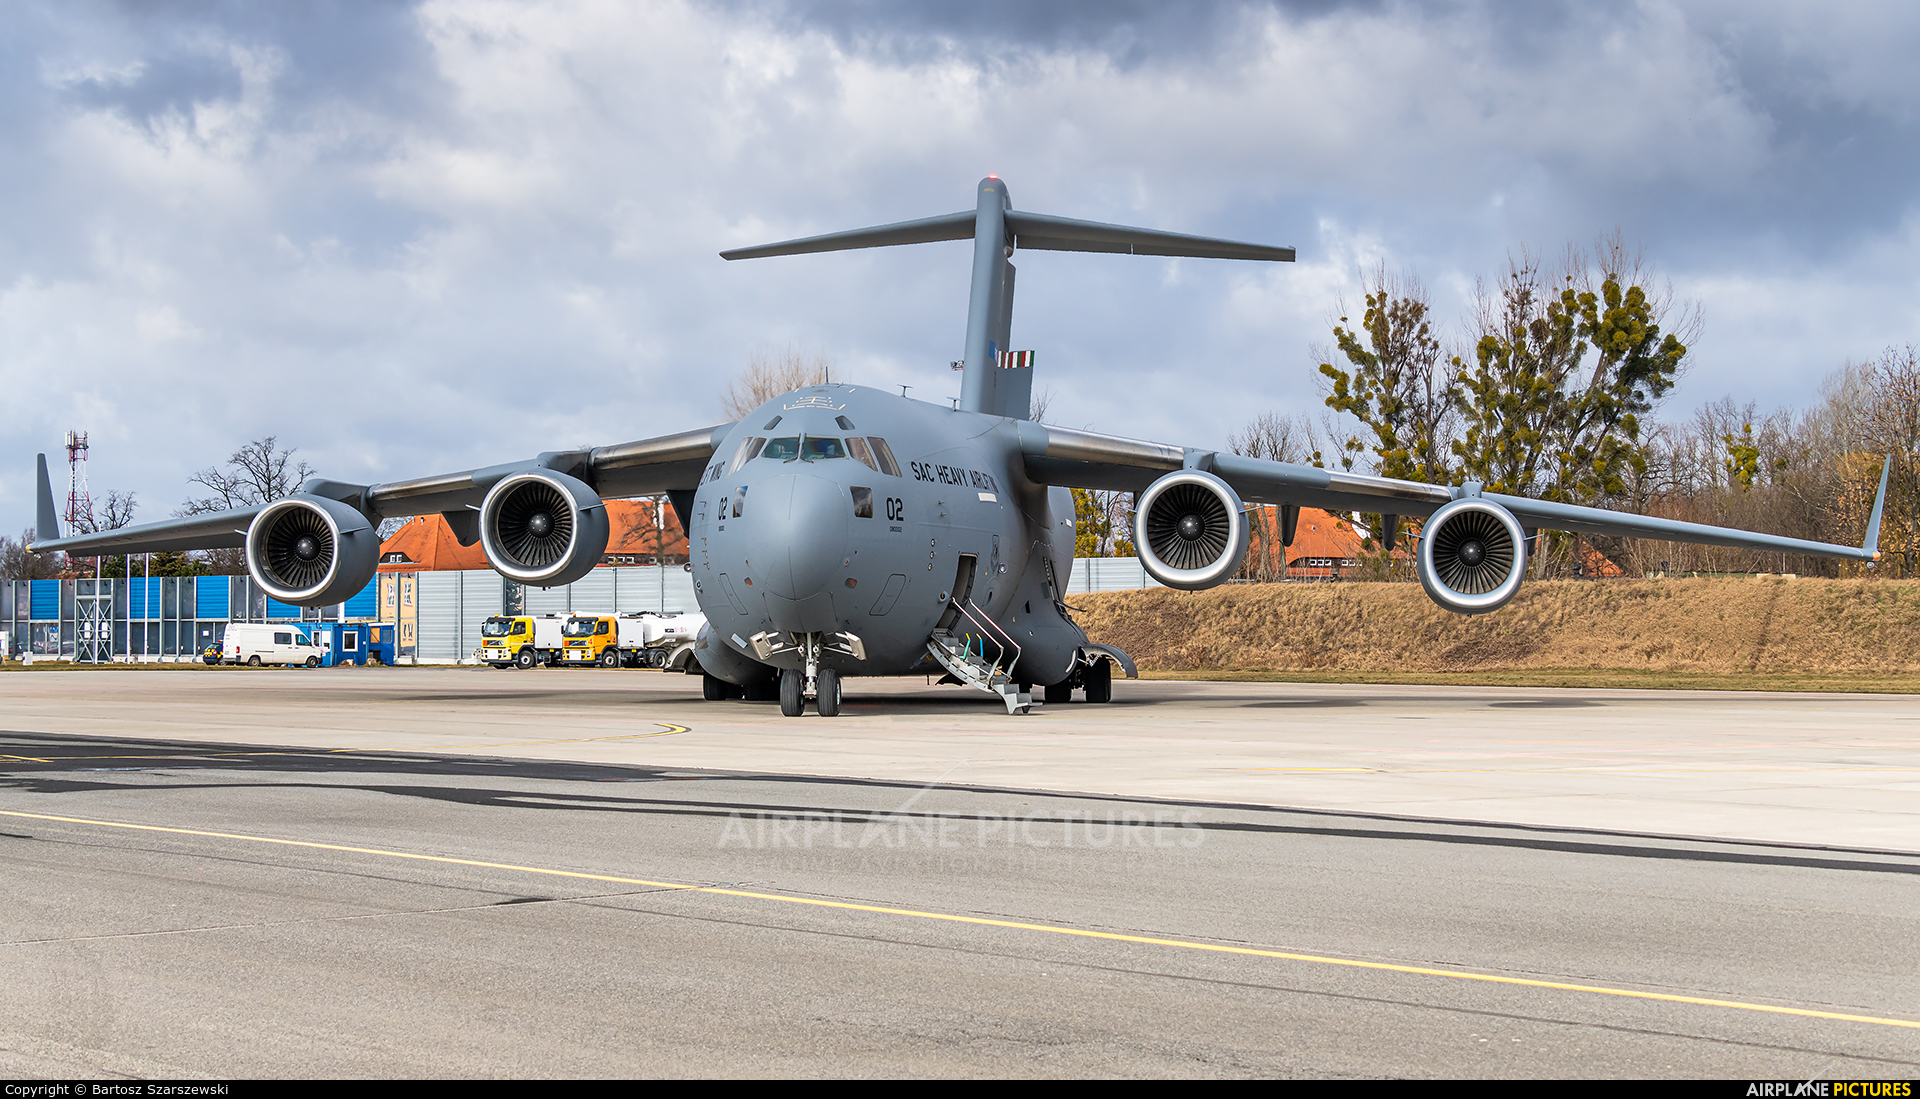 Strategic Airlift Capability NATO 08-0002 aircraft at Wrocław - Copernicus